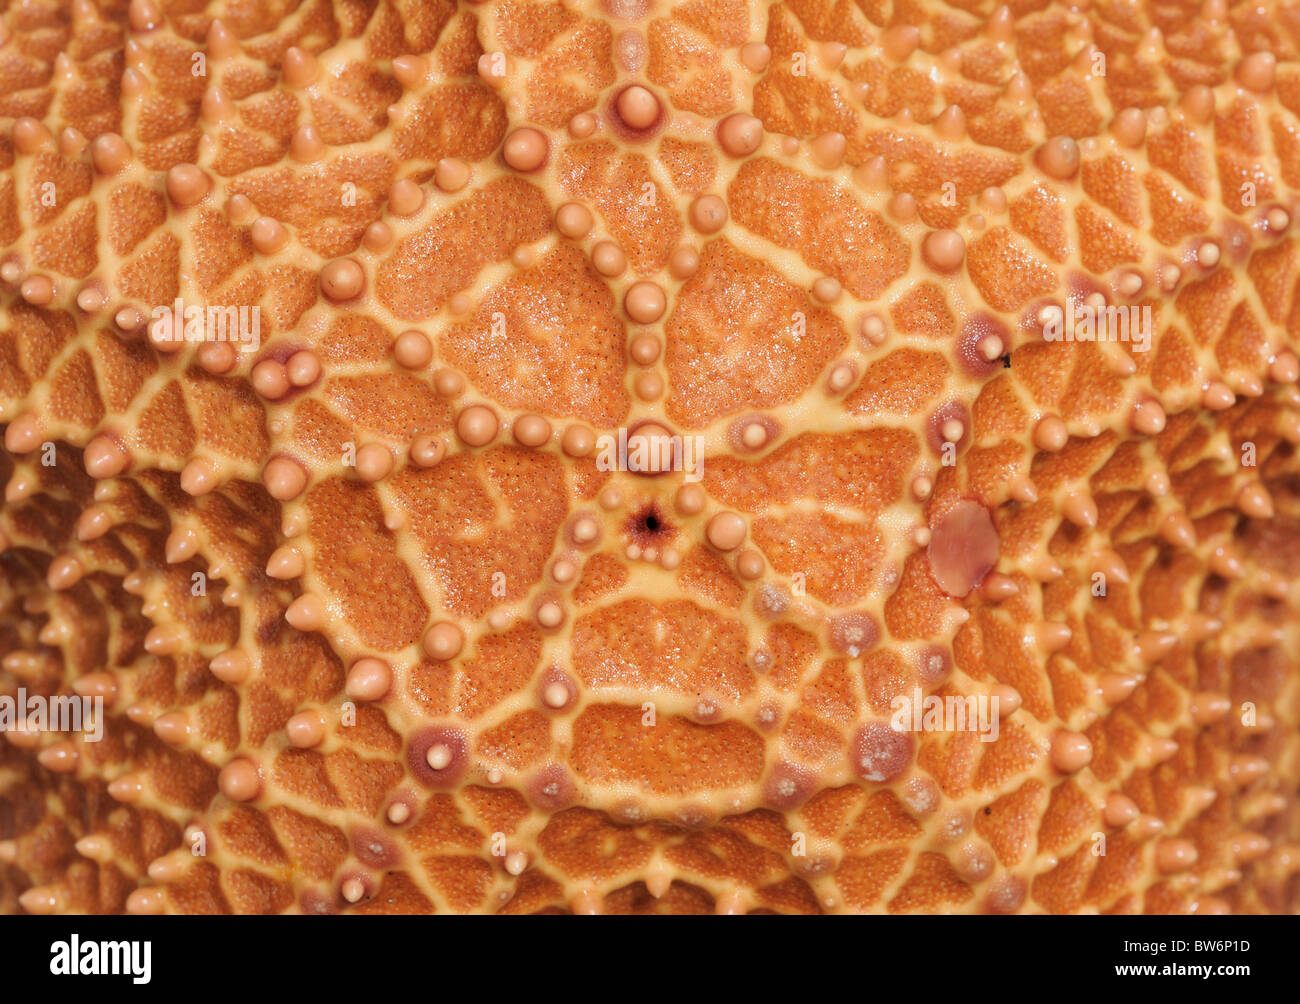 Upperside (aboral or dorsal surface) of a sea star (red cushion star, Oreaster reticulatis) showing the madreporite and spines. Stock Photo